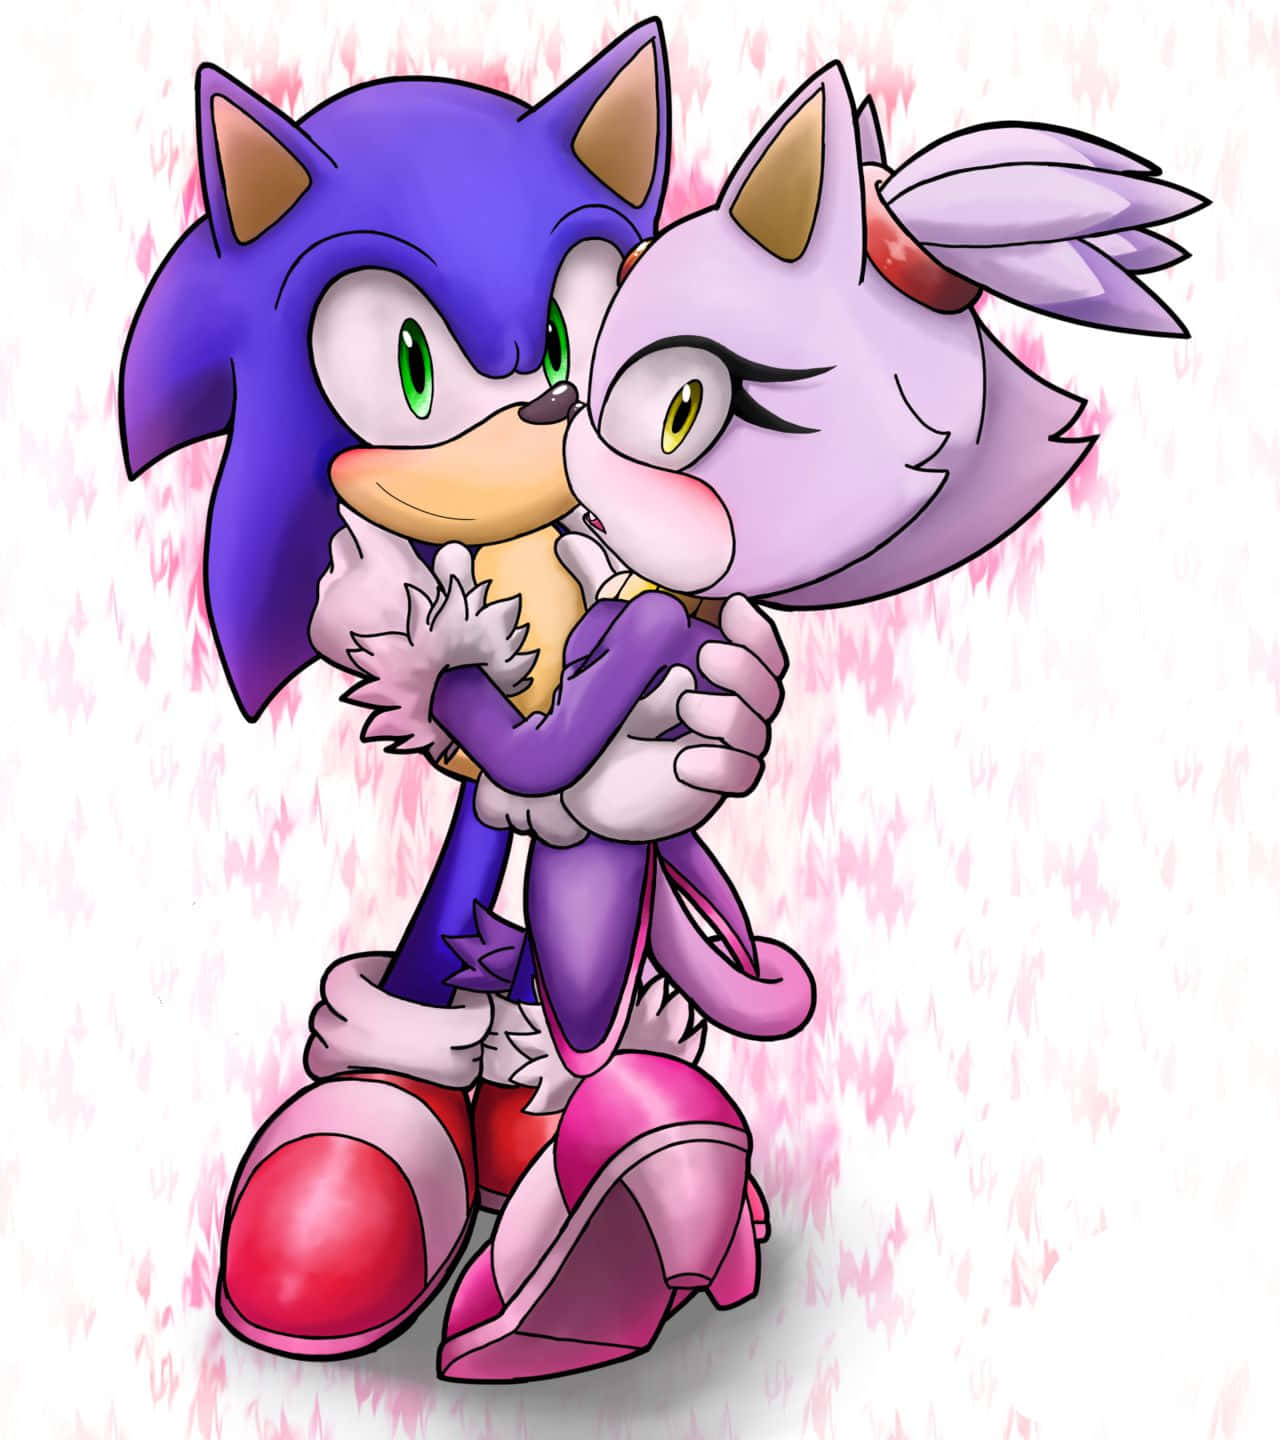 sonic the hedgehog and blaze the cat kissing